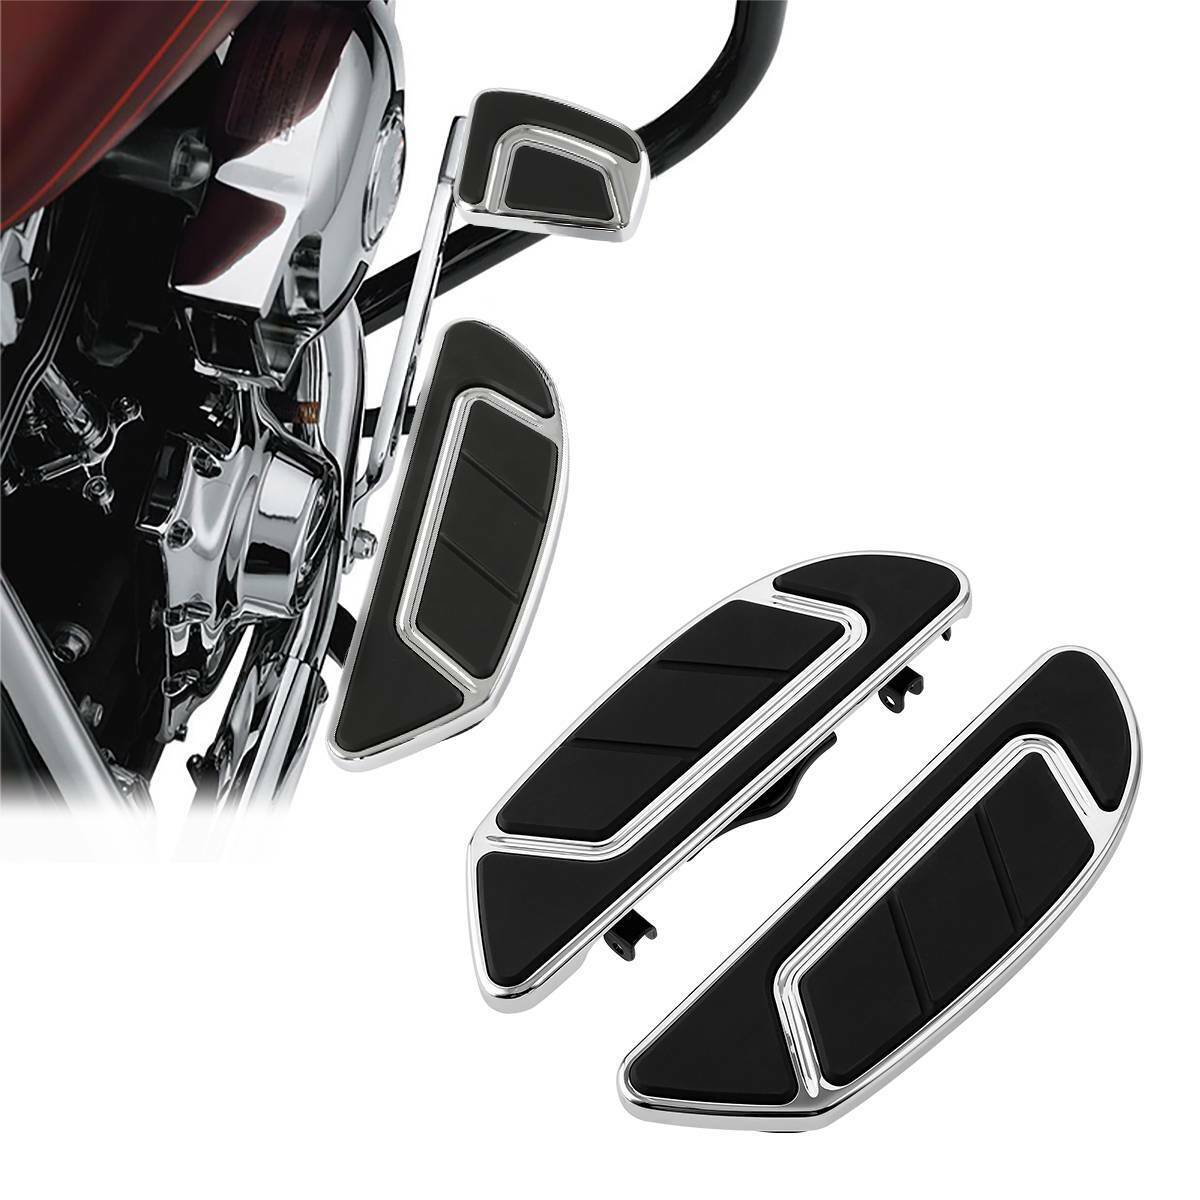 Chrome Rider Driver Floorboard Footboard Fit For Harley Touring Road Glide 06-23